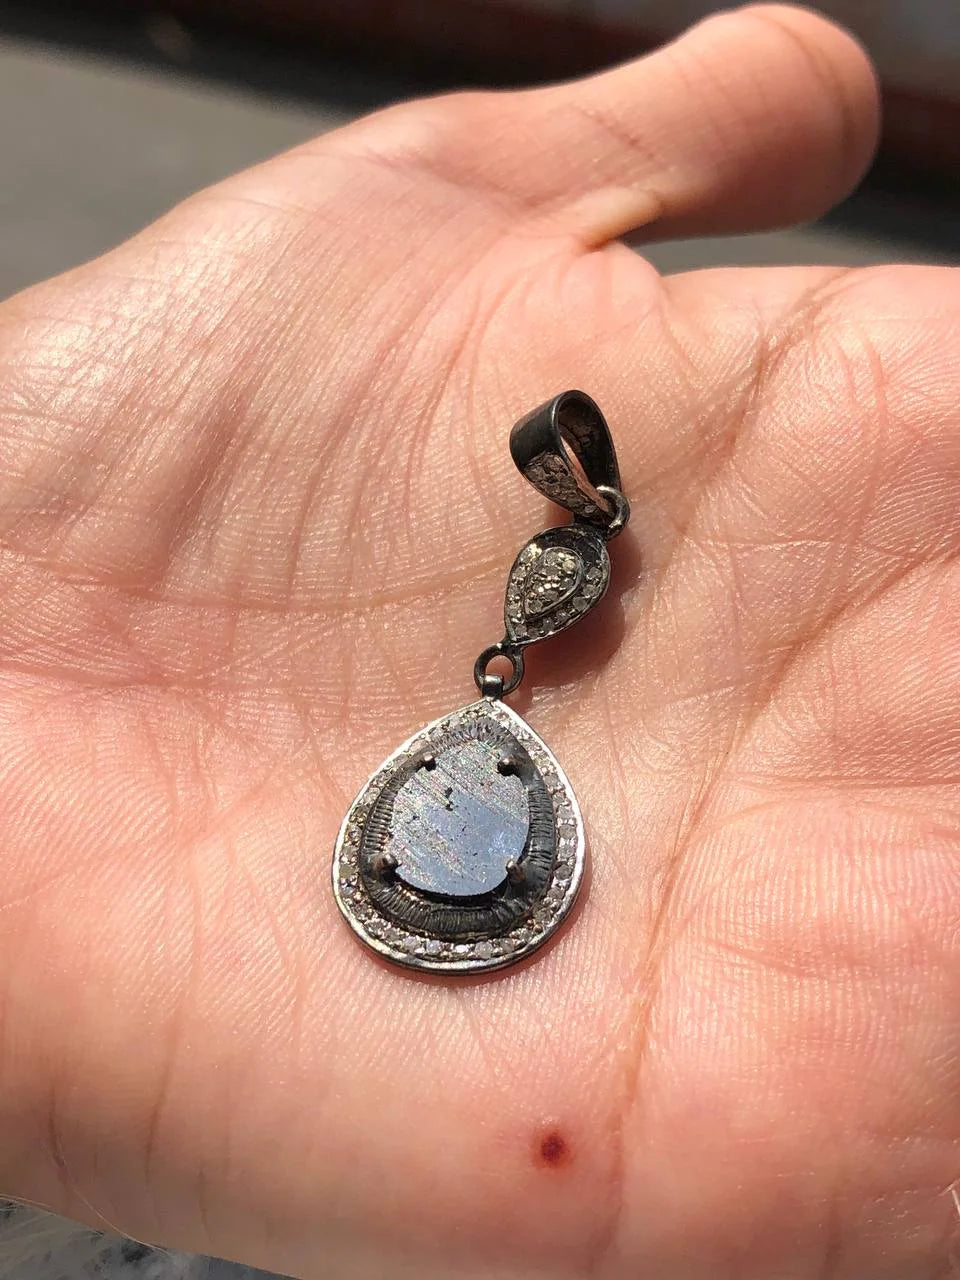 Unique Vintage Style Pendant - Delicate 925 Sterling Silver Jewelry